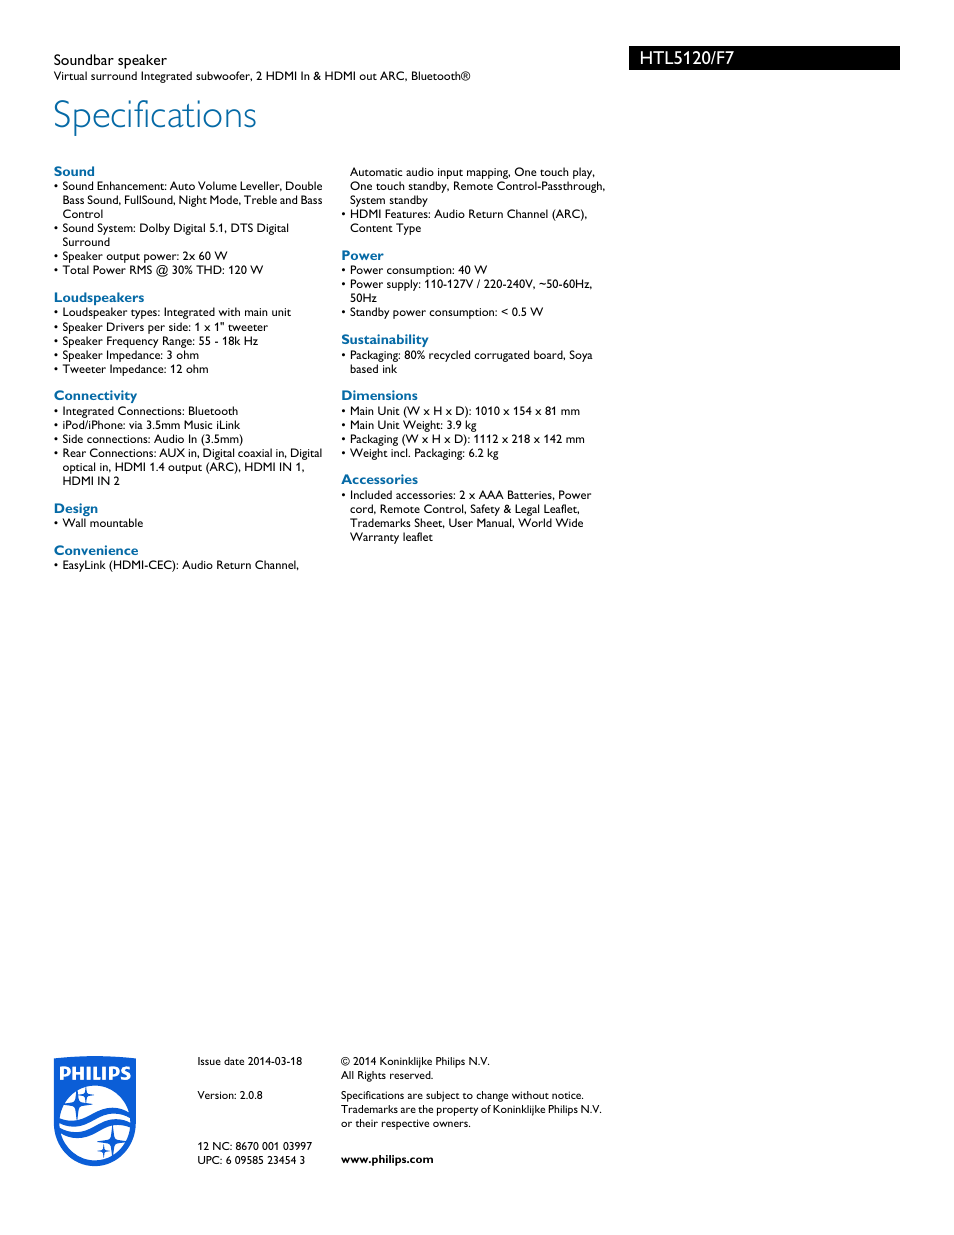 Specifications | Philips HTL5120-F7 User Manual | Page 3 / 3